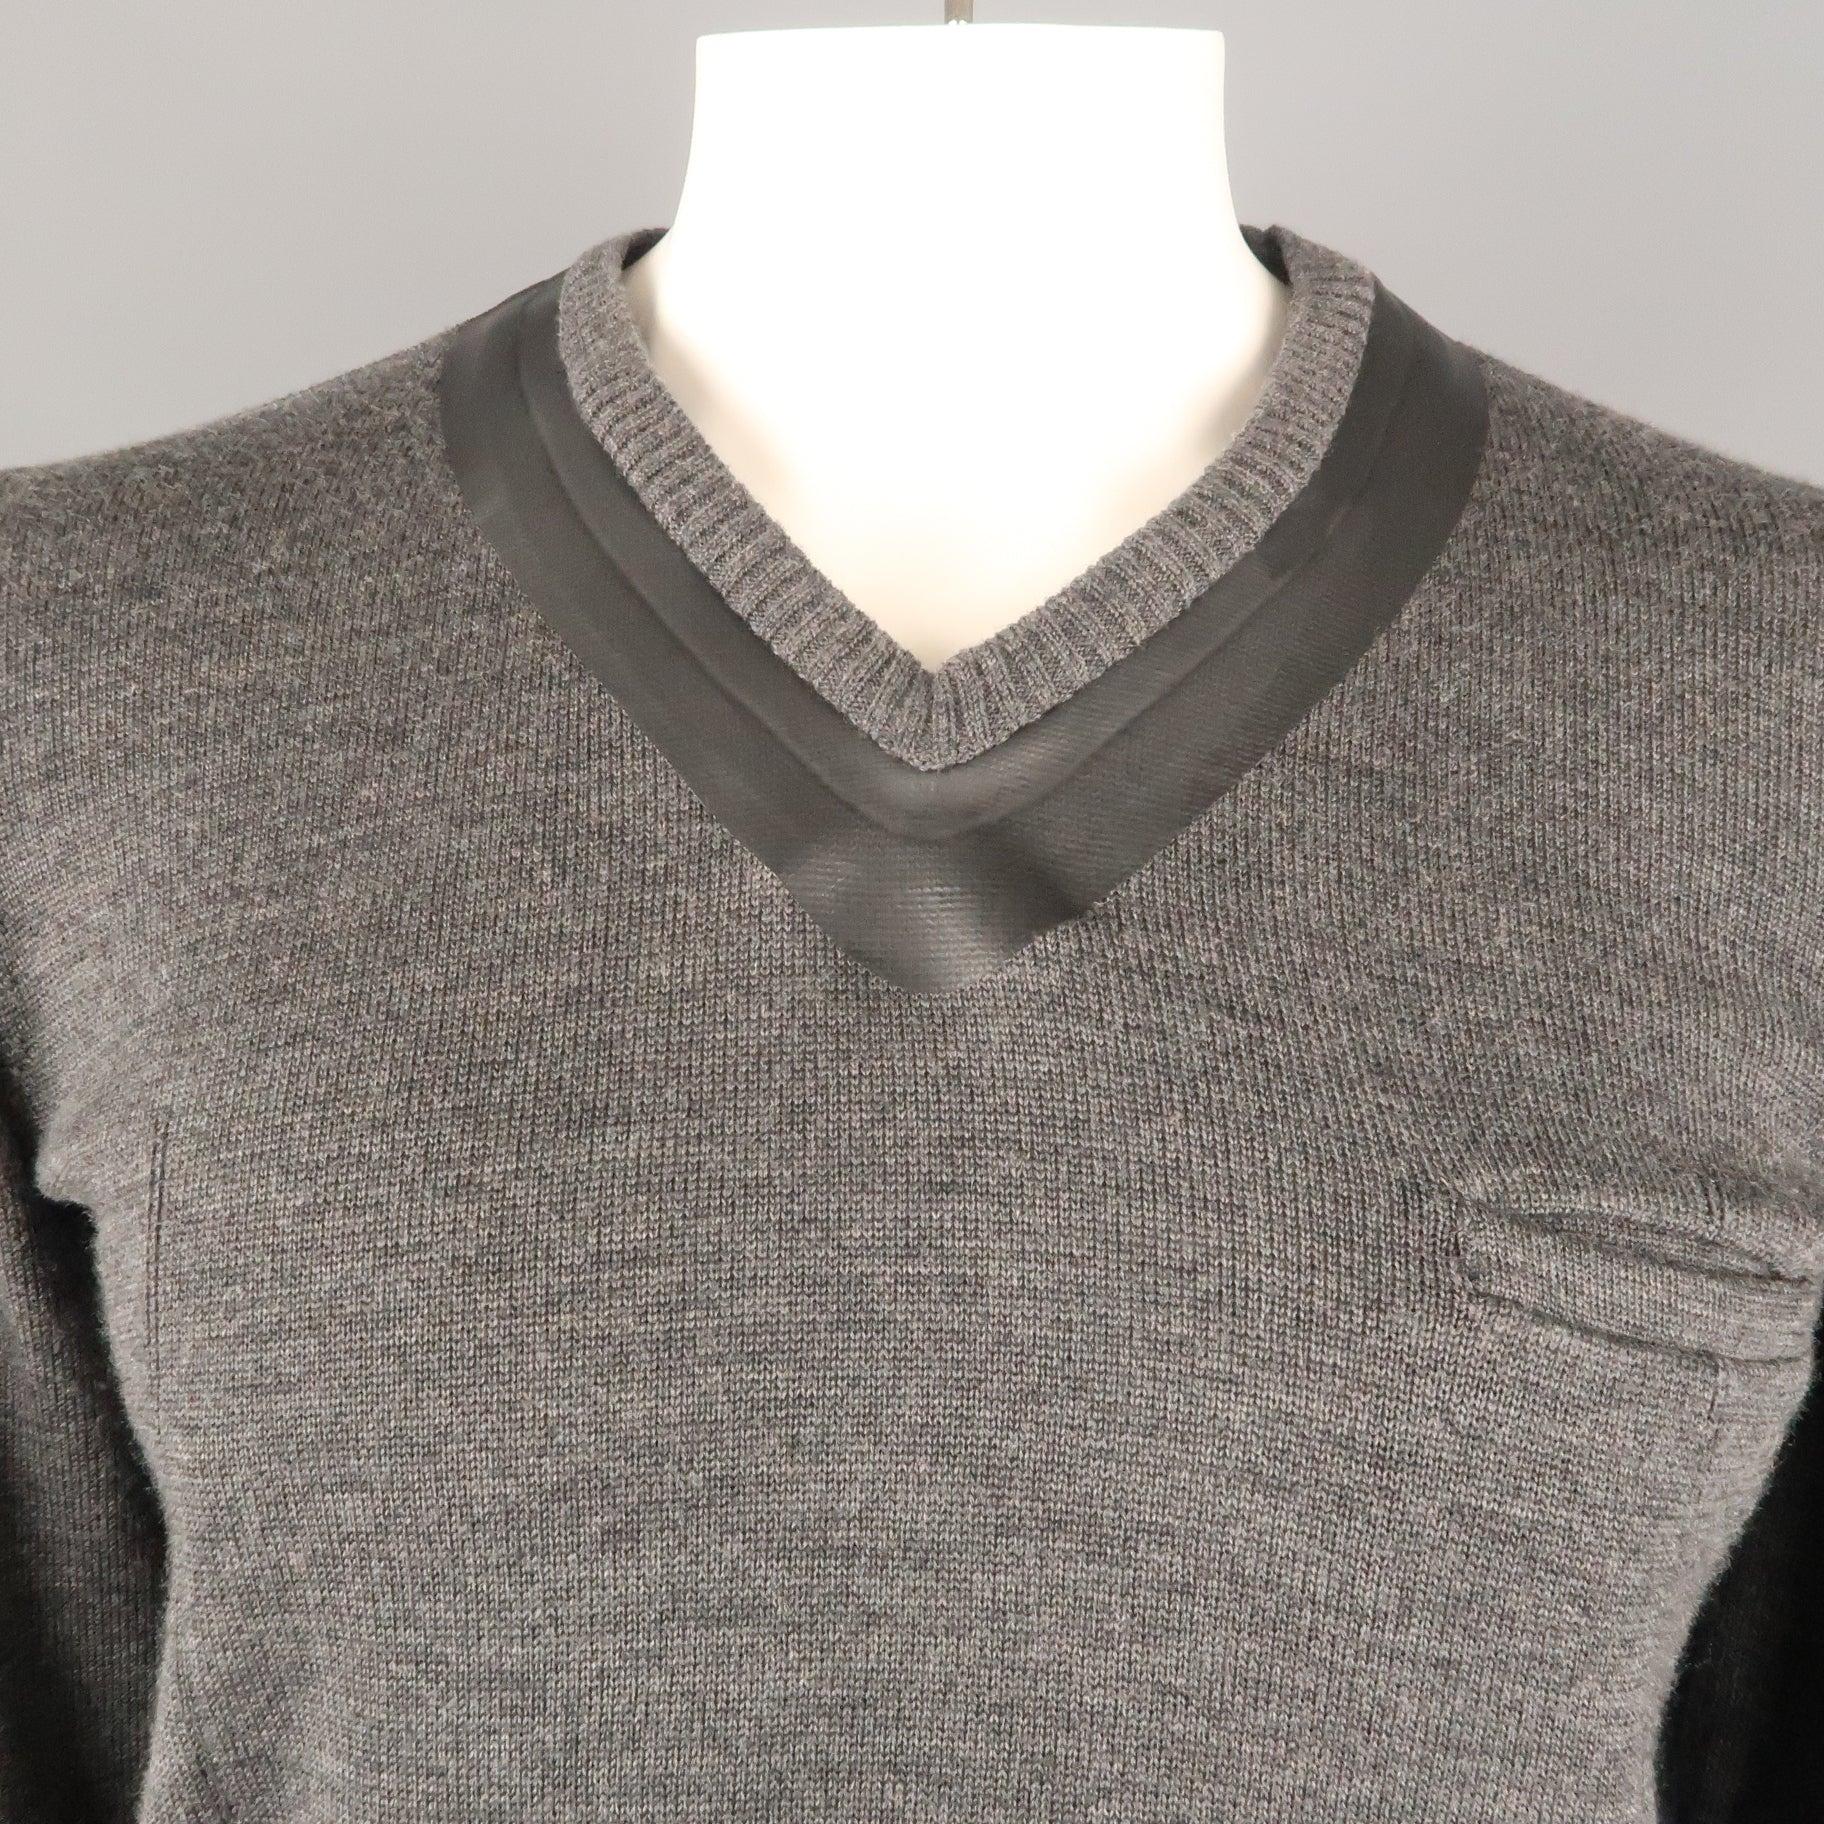 UNDERCOVER pullover comes in a charcoal wool featuring a v-neck style, black trim, and a size zipper detail. Made in Japan.
Excellent Pre-Owned Condition.
 

Marked:   JP 4
 

Measurements: 
  
l	Shoulder: 20 inches  
l	Chest: 42 inches  
l	Sleeve: